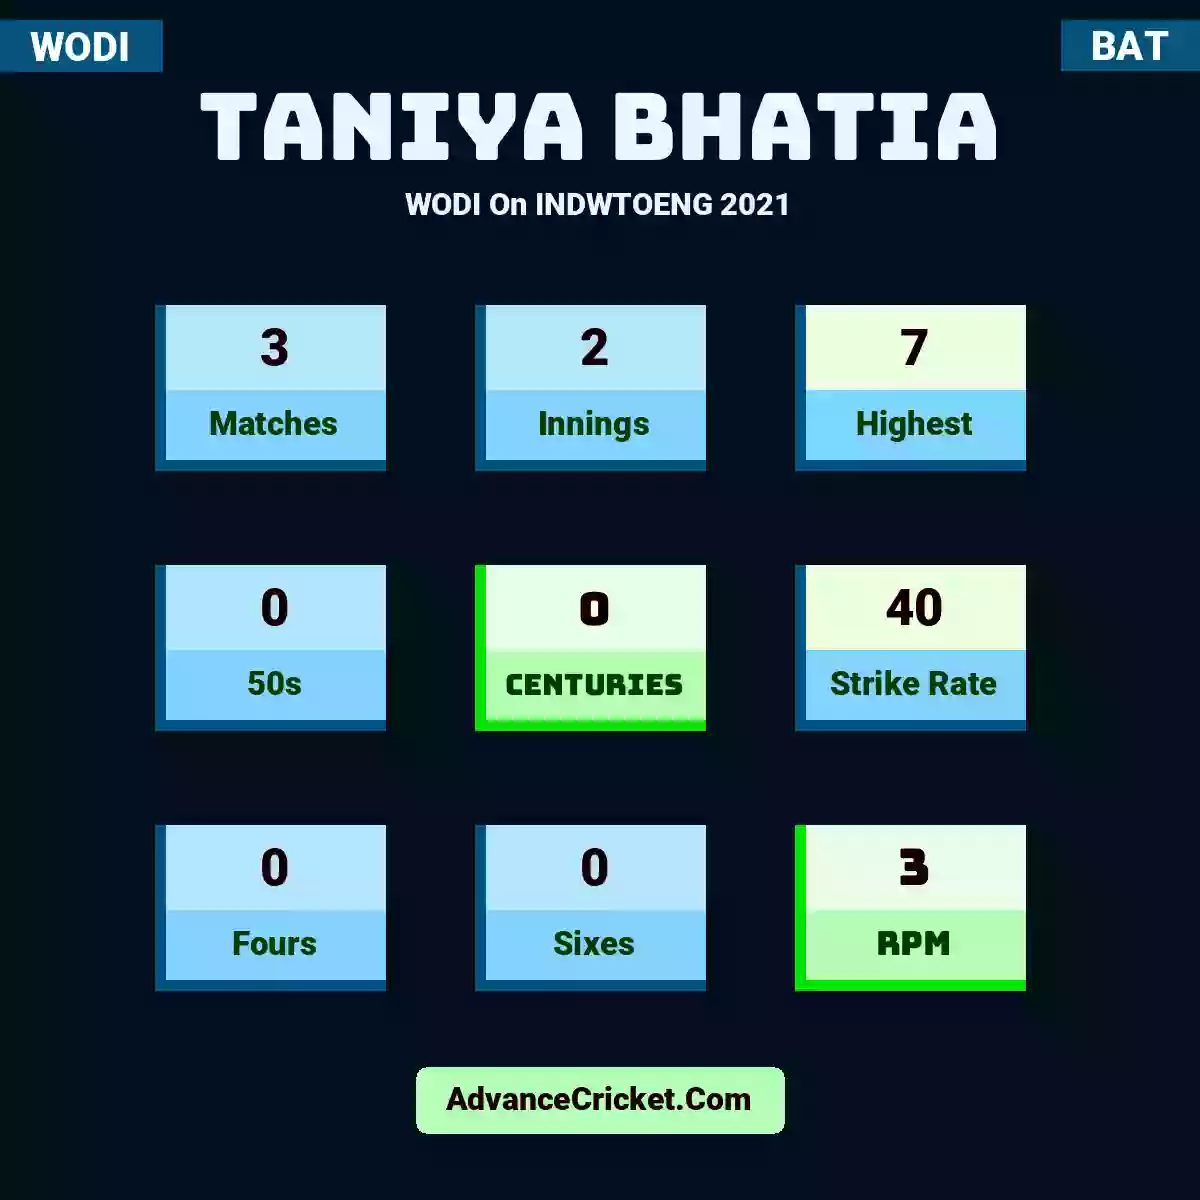 Taniya Bhatia WODI  On INDWTOENG 2021, Taniya Bhatia played 3 matches, scored 7 runs as highest, 0 half-centuries, and 0 centuries, with a strike rate of 40. T.Bhatia hit 0 fours and 0 sixes, with an RPM of 3.